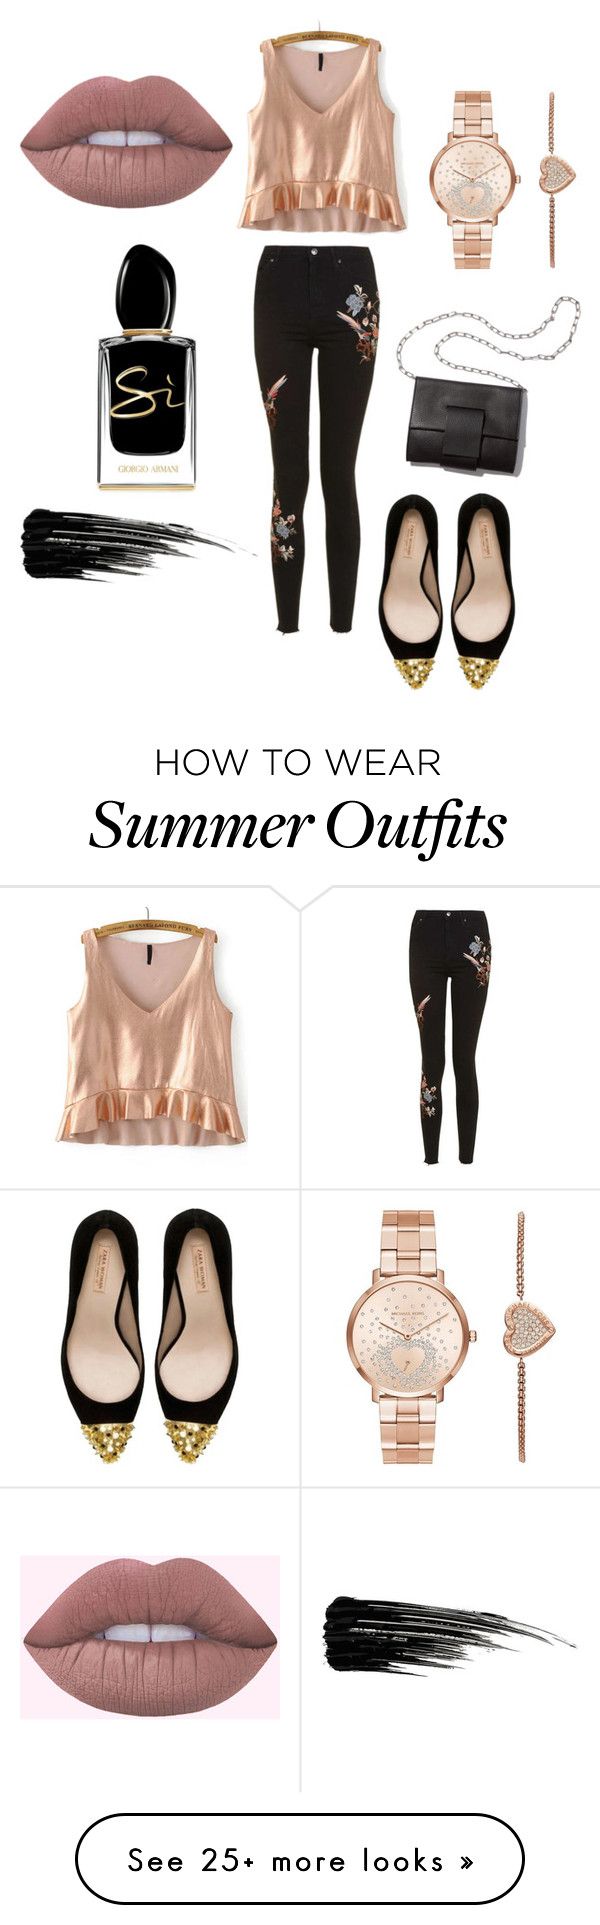 "2017 spring/summer outfit" by hodan-dahir on Polyvore featuring Topsh...